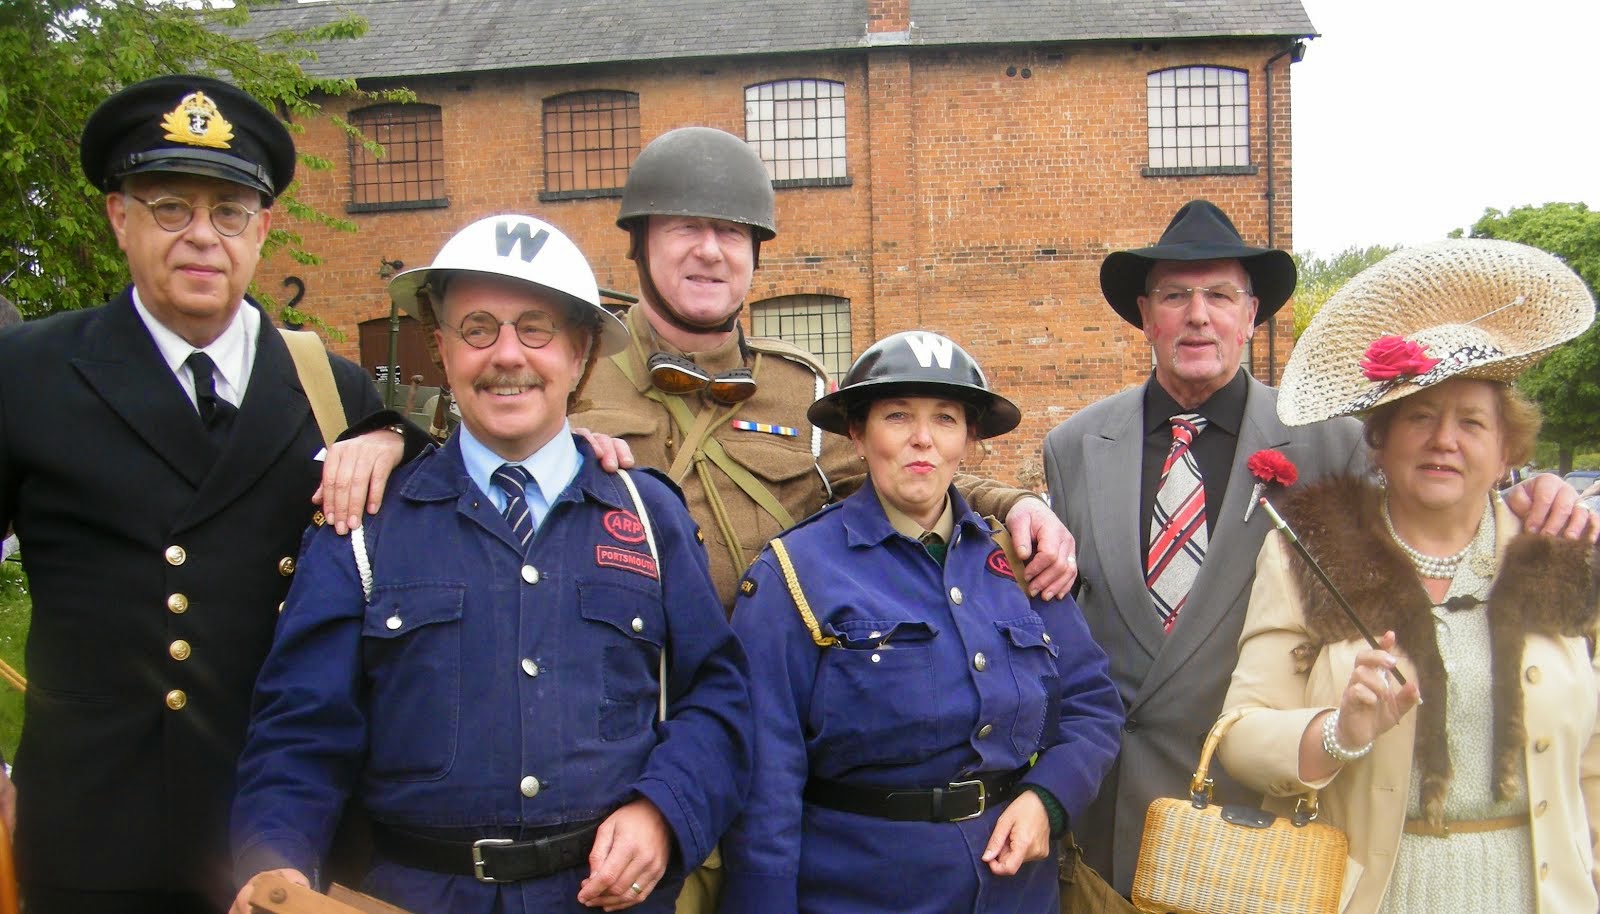 1940s Remembered at Forge Mill Museum